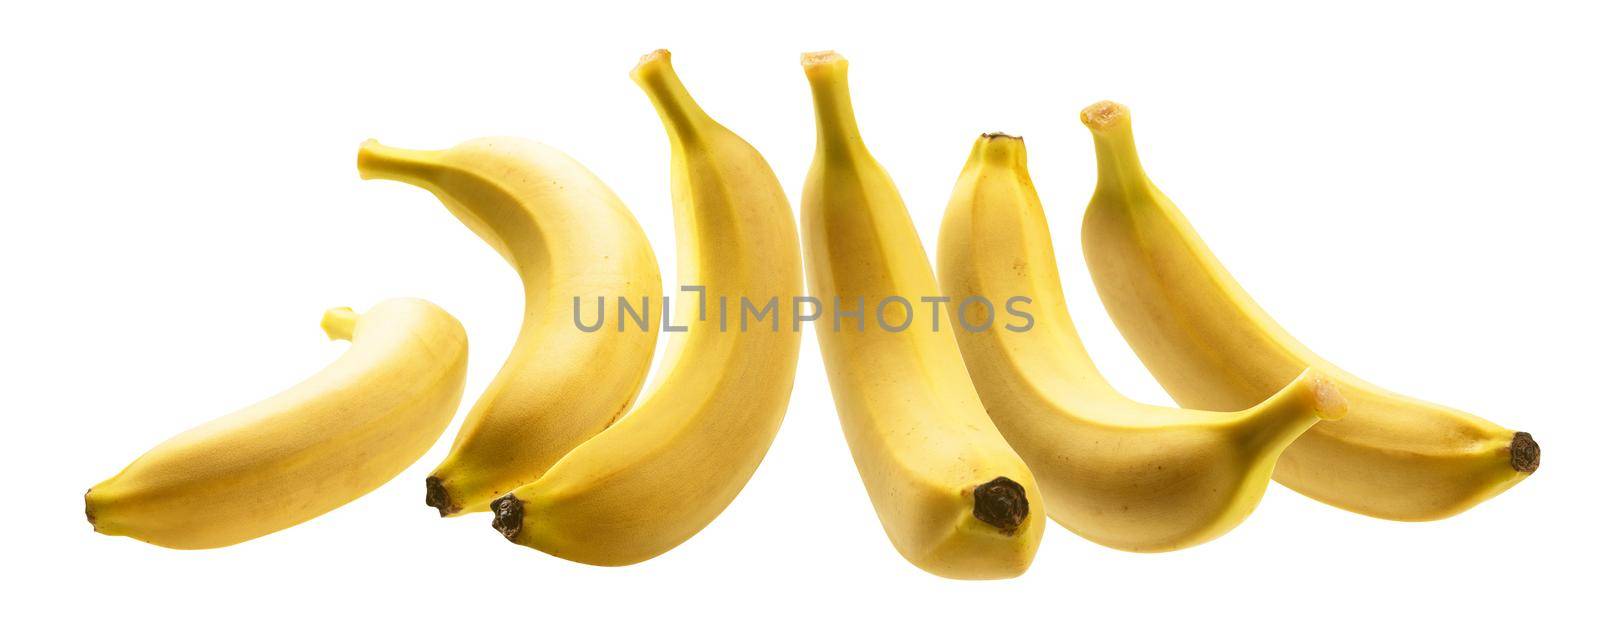 Yellow bananas levitate on a white background by butenkow